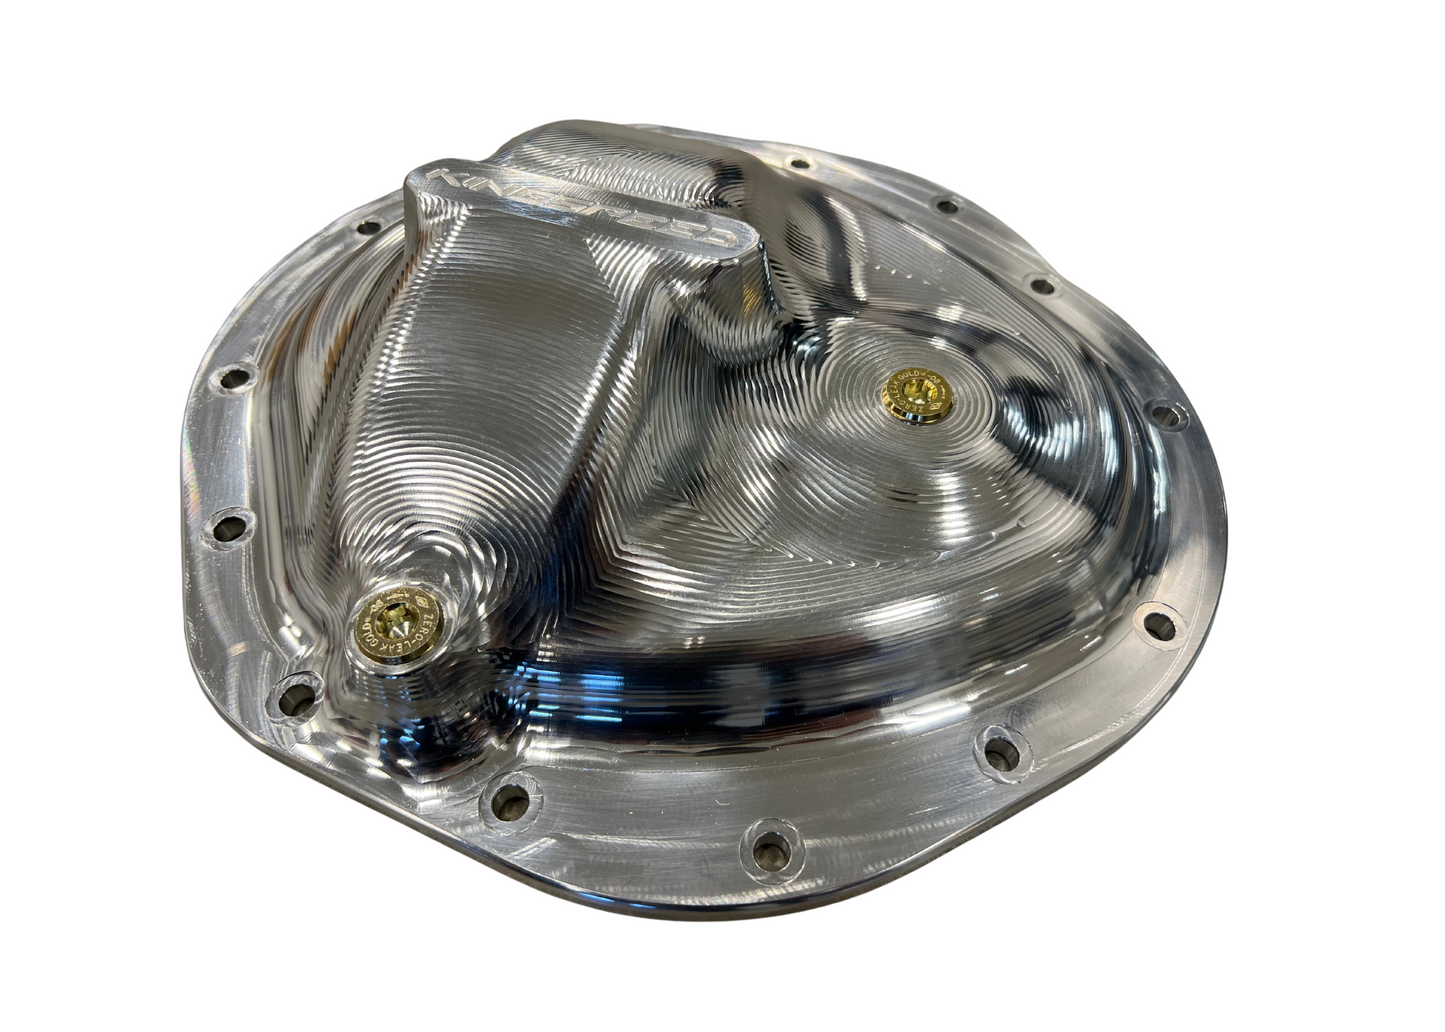 Kingspeed Billet Aluminum Differential Cover AAM 9.25